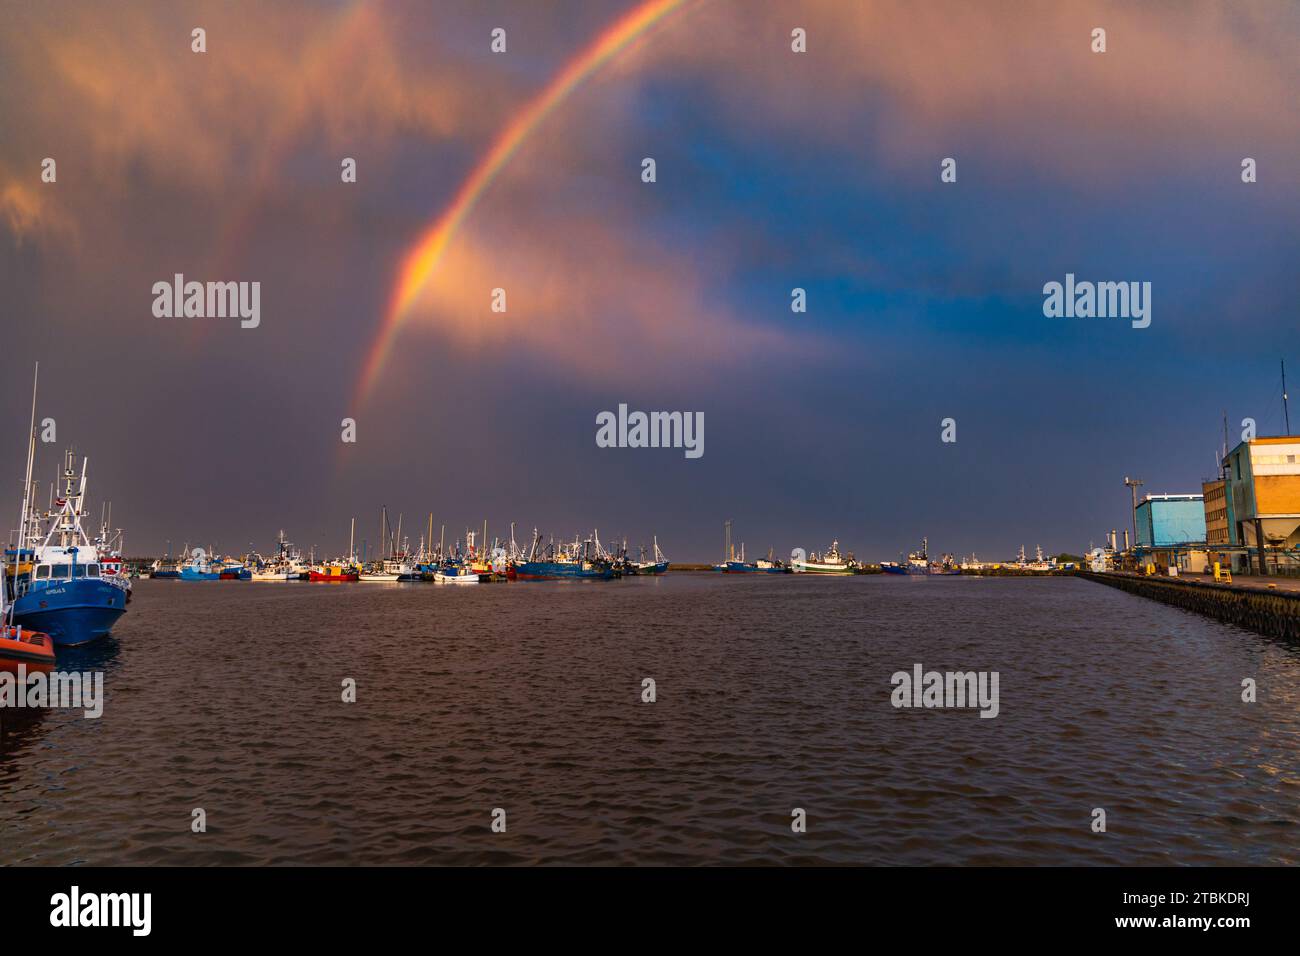 Wladyslawowo, Poland - July 24 2023: Beautiful double rainbow over boats docked at the port after long storm over the Baltic sea Stock Photo